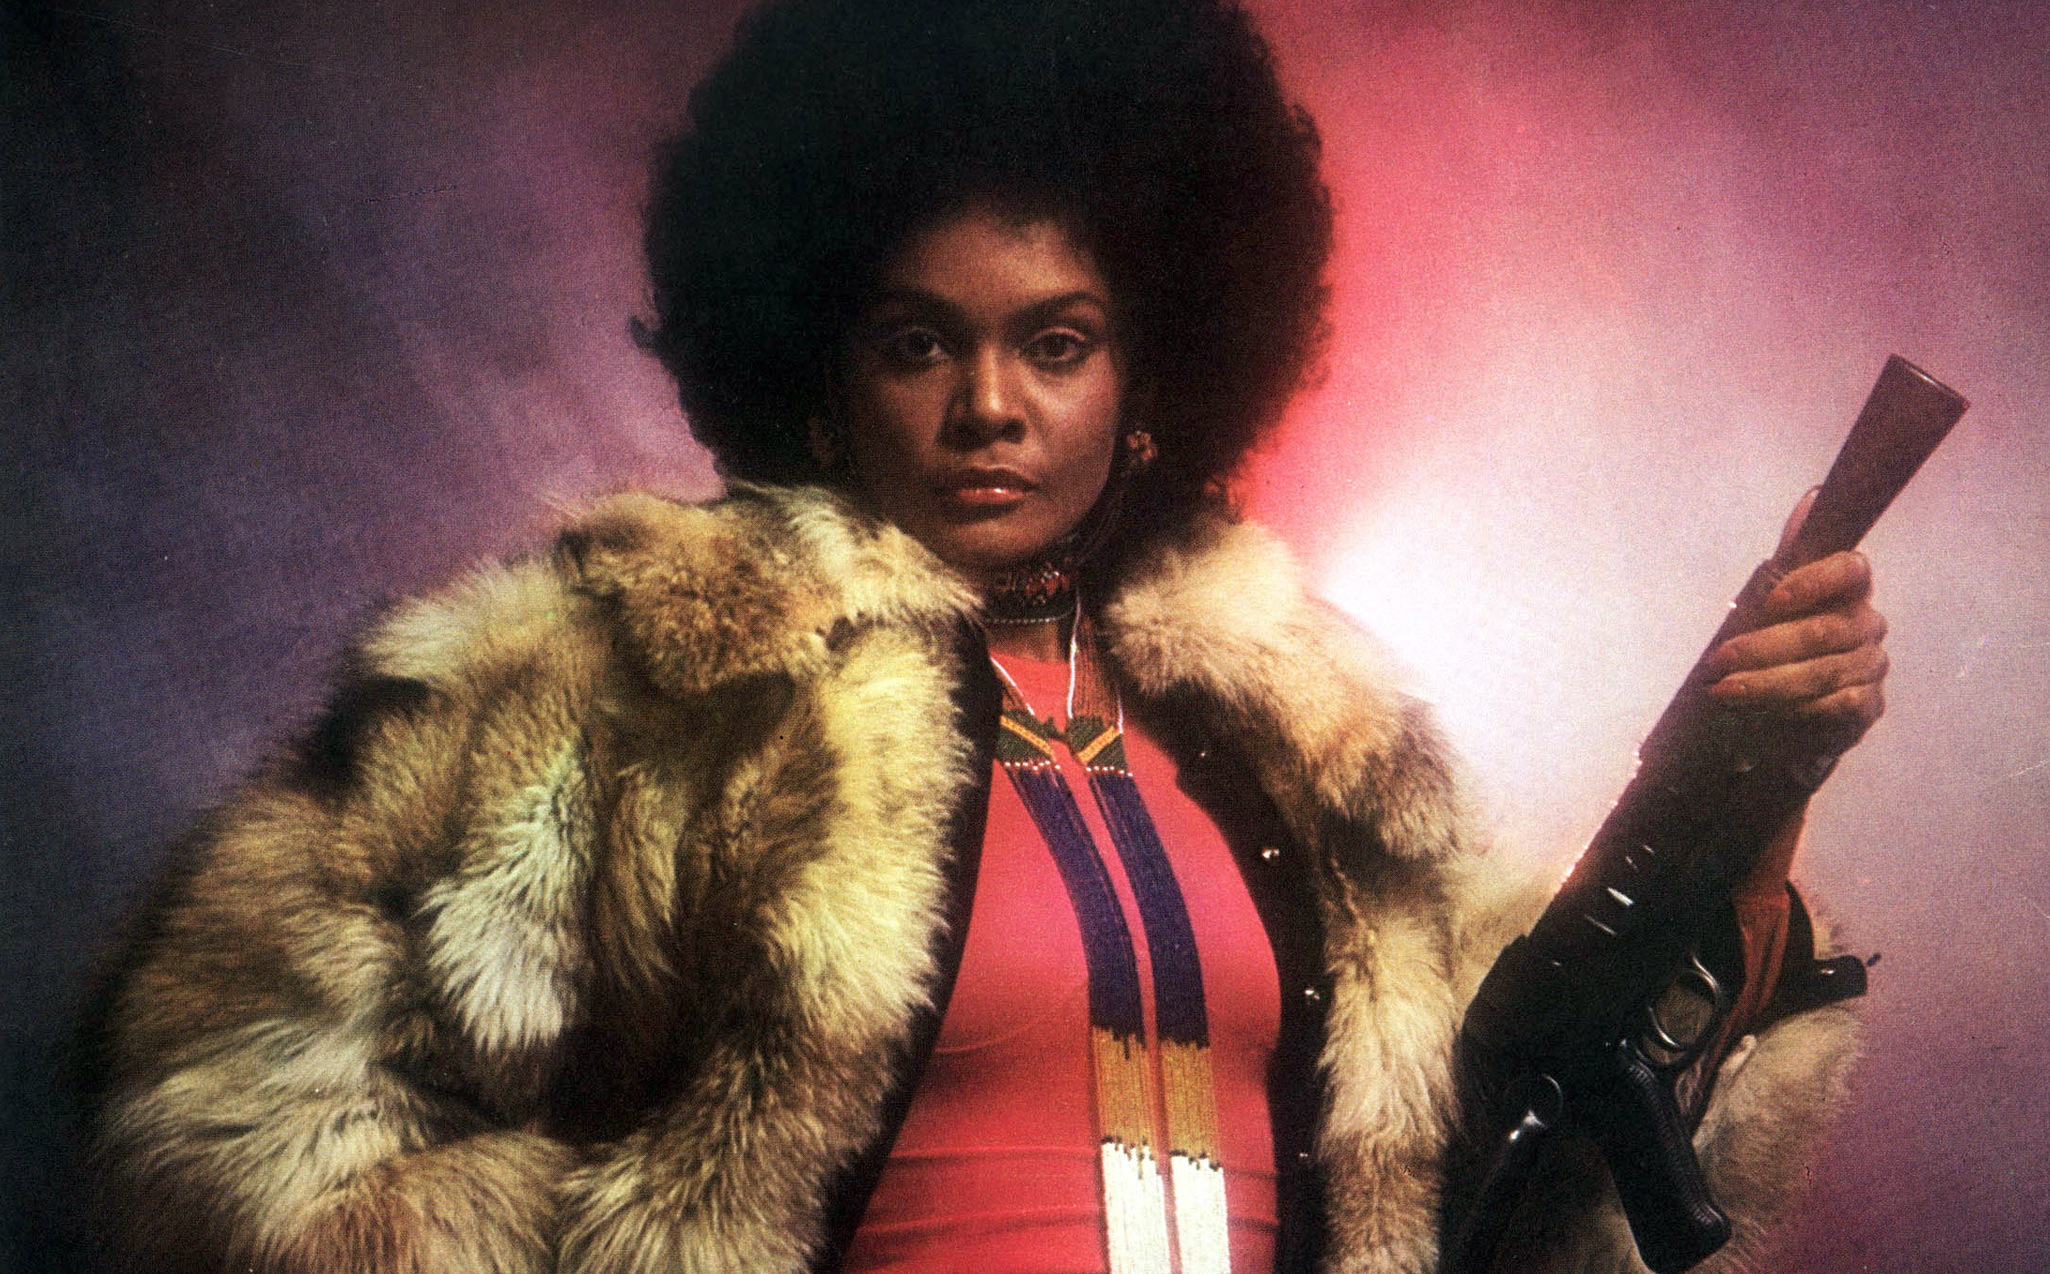 Tyranny Part #43 - Cleopatra Jones and the Town Full of Racists